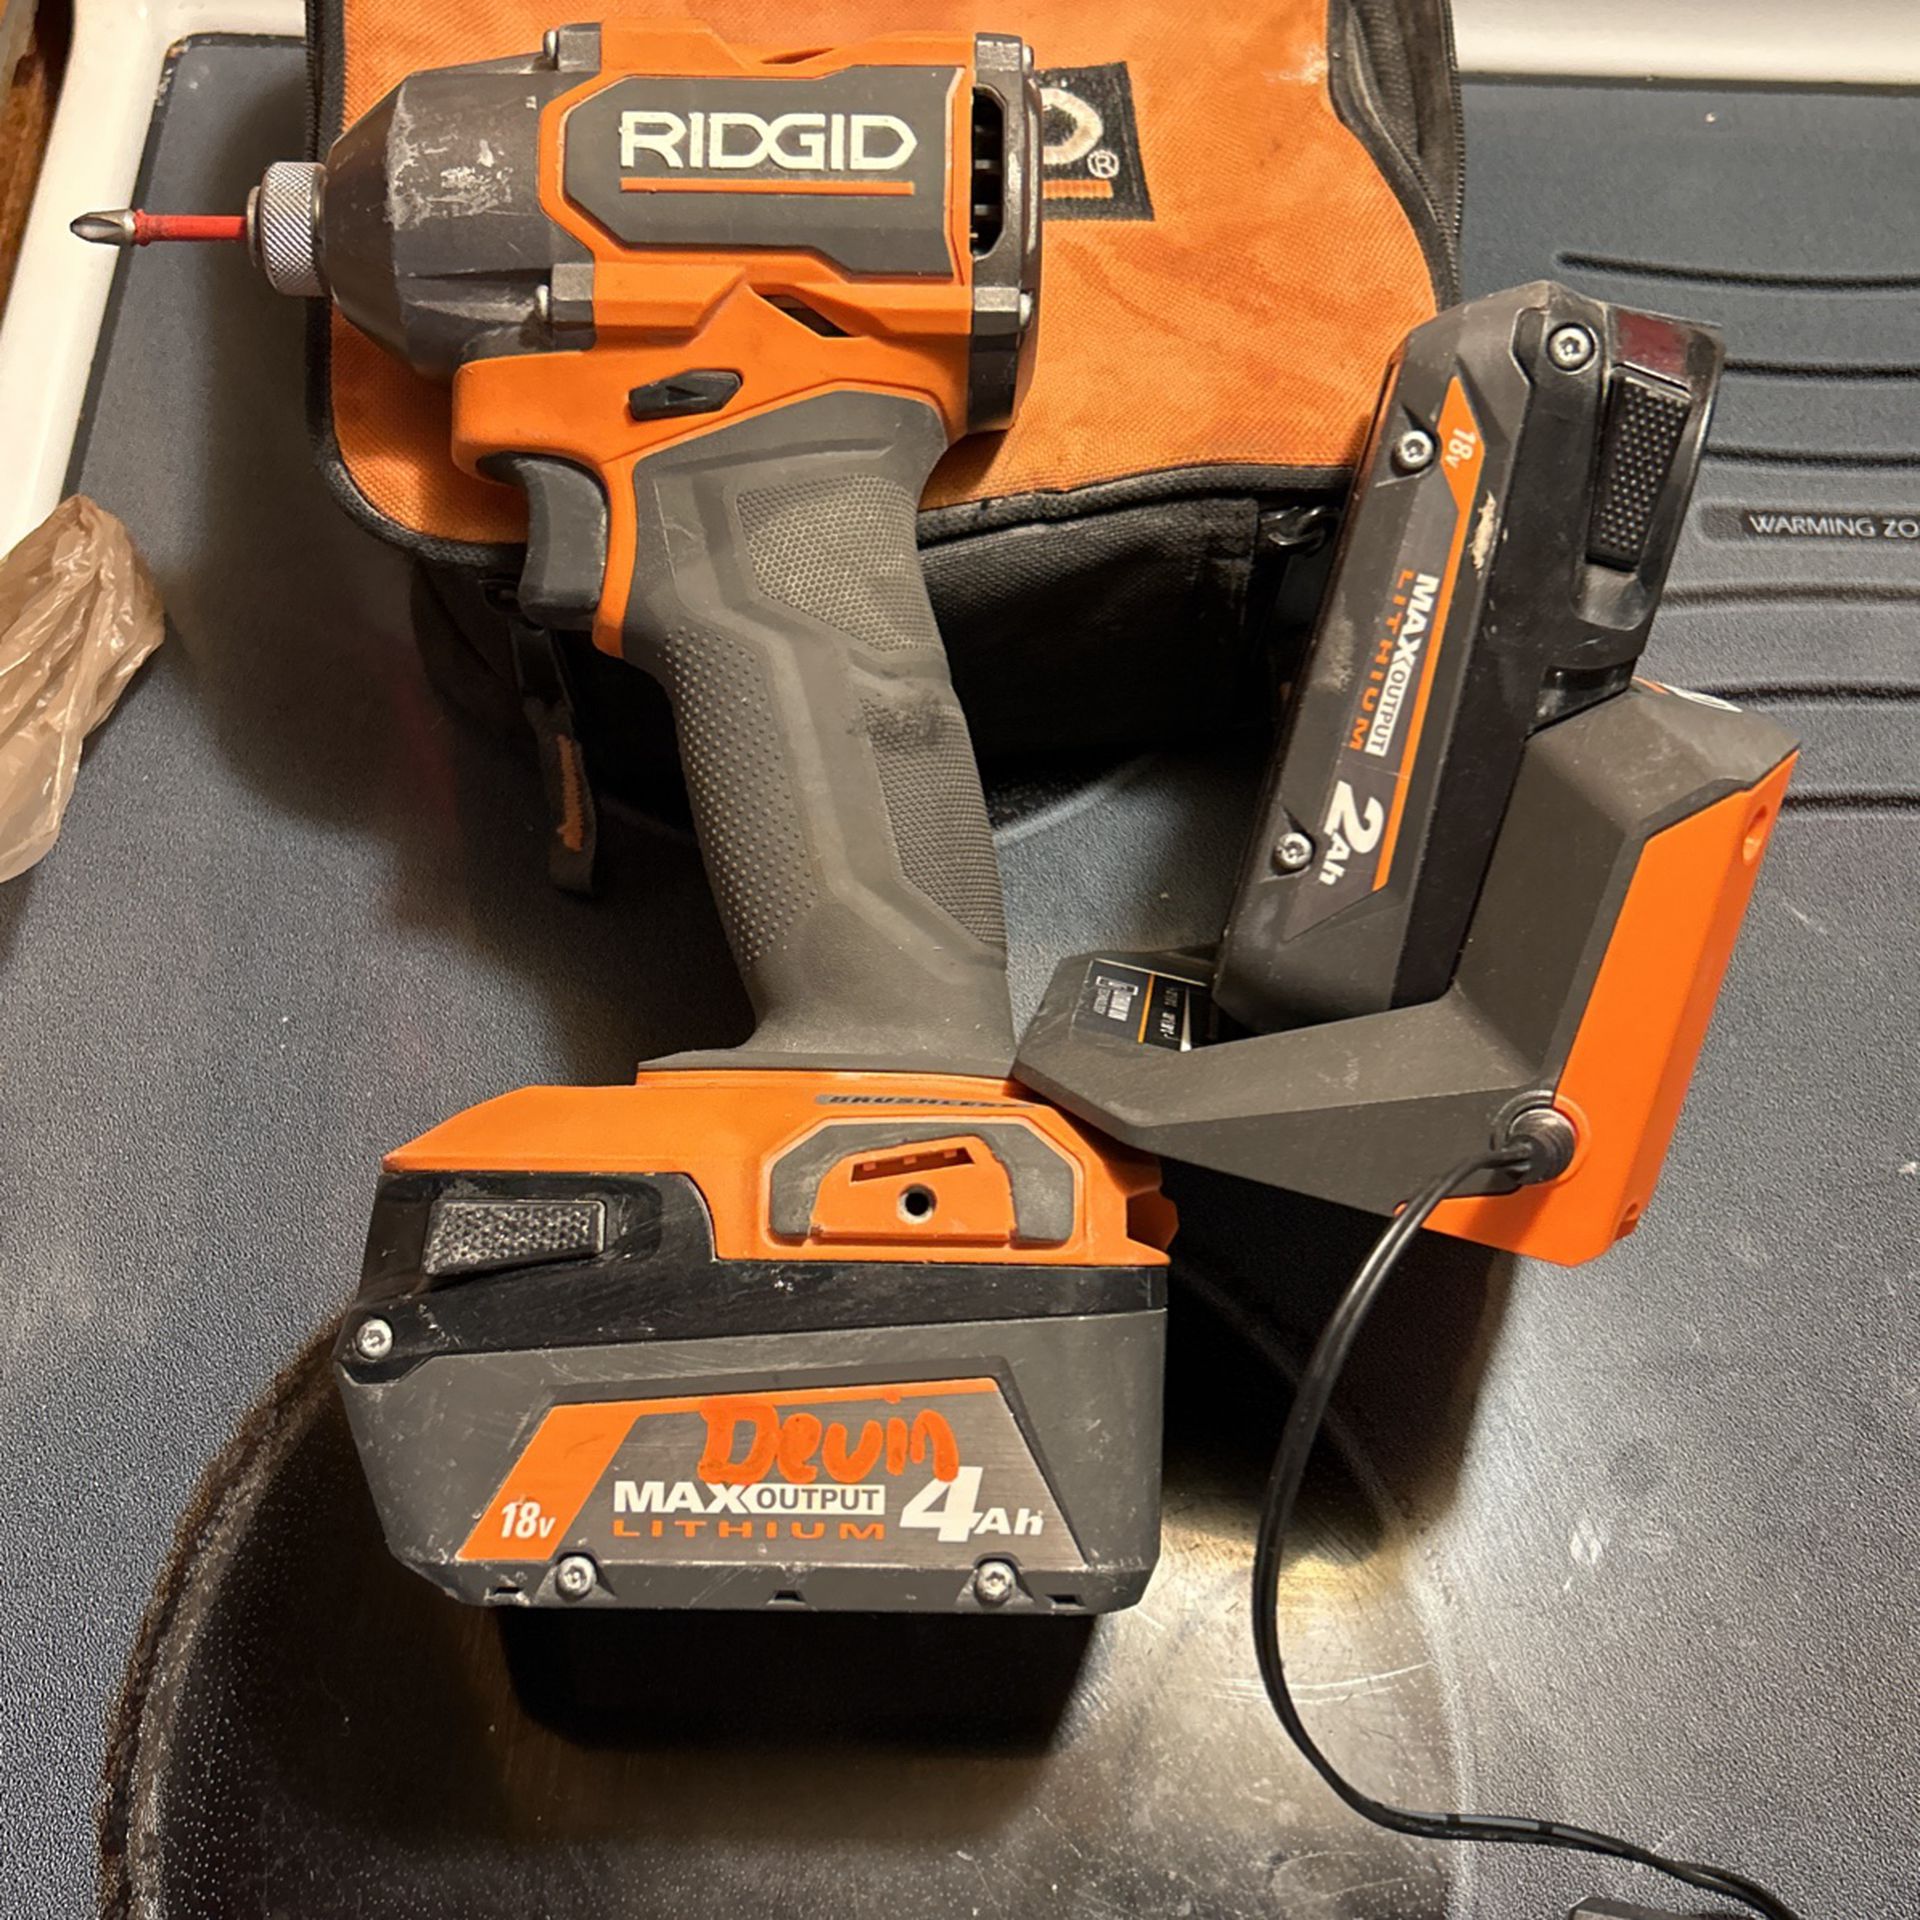 Ridgid Brushless Impact Drill W/2 Batteries And Charger 